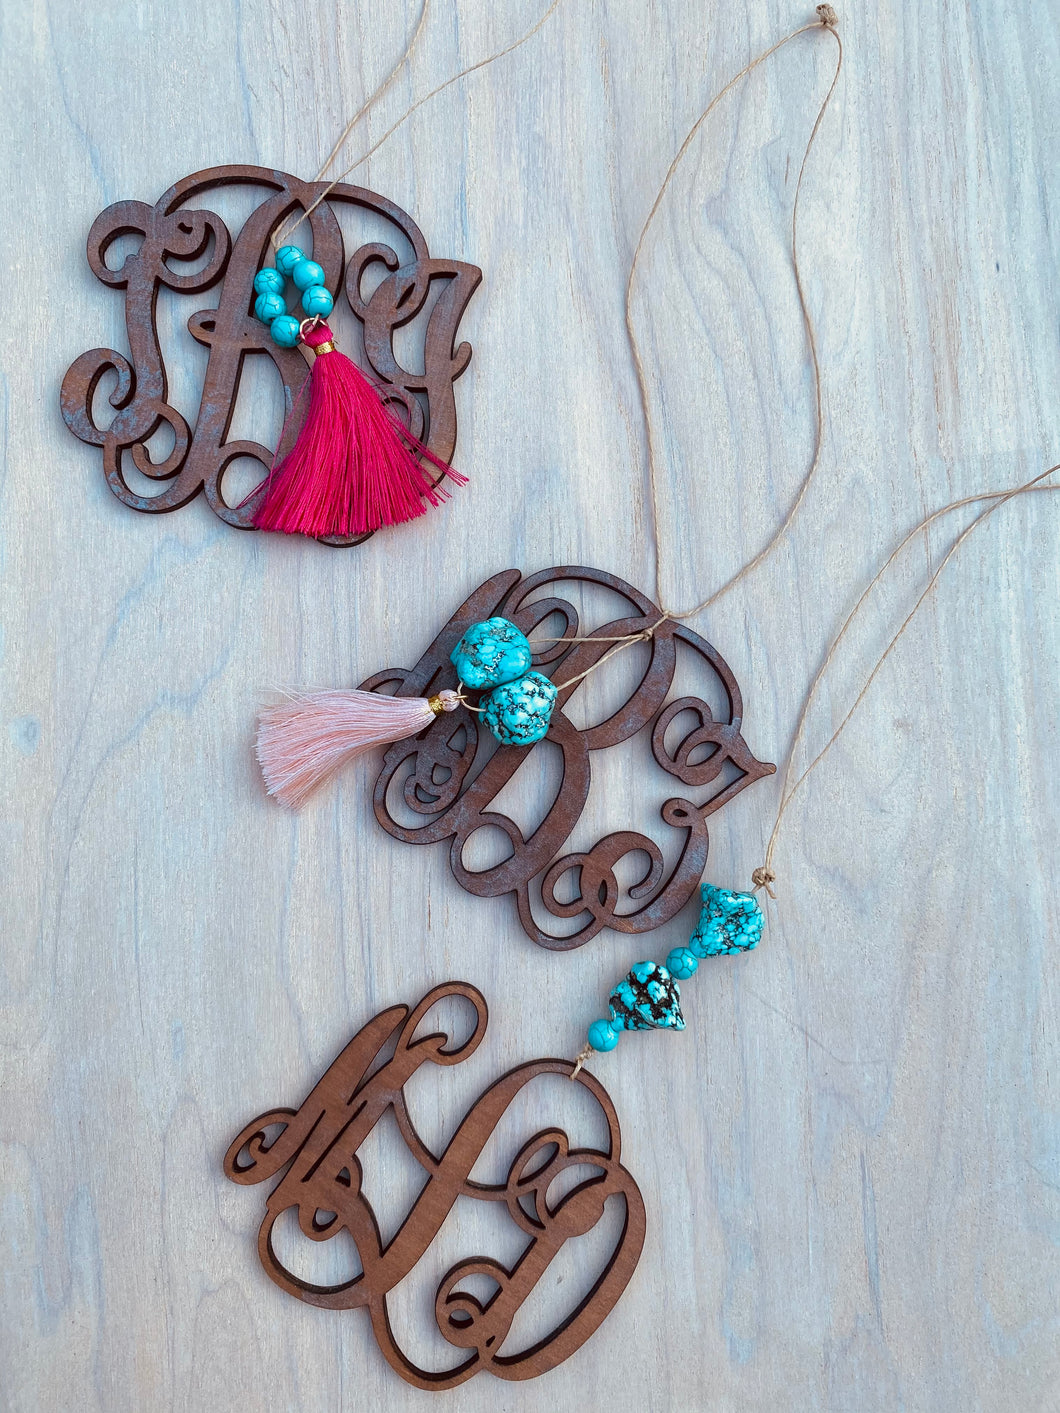 Wooden Monogram Charm With Accessories